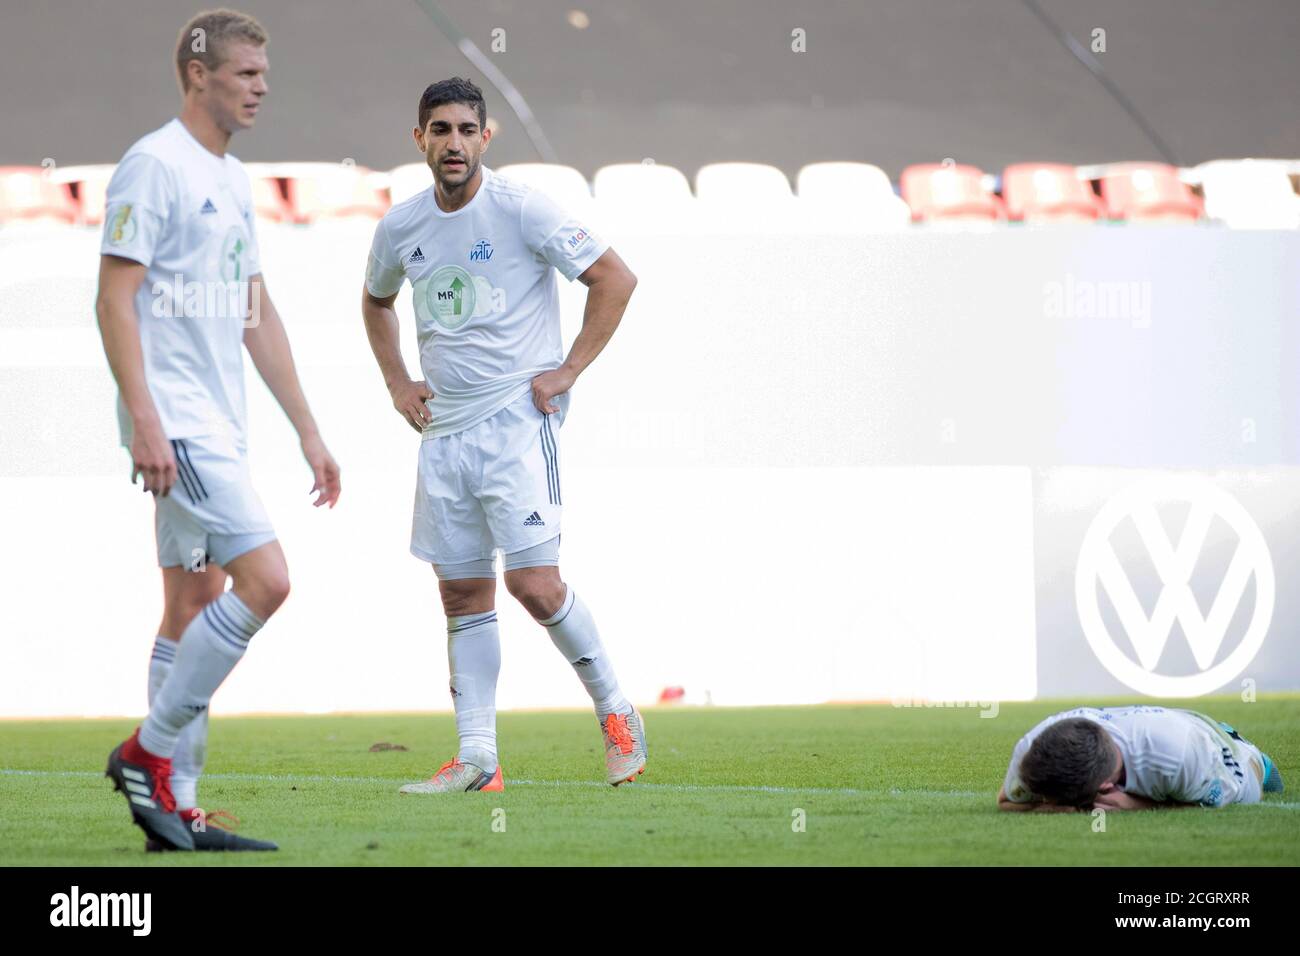 Augsburg, Germany. 12th Sep, 2020. Football: DFB Cup, Eintracht Celle - FC Augsburg, 1st round, WWK Arena. Celles Malte Marquardt (l-r), Celles Gerbi Kaplan and Celles Tim-Yannick Struwe react in the game. Credit: Tom Weller/dpa - IMPORTANT NOTE: In accordance with the regulations of the DFL Deutsche Fußball Liga and the DFB Deutscher Fußball-Bund, it is prohibited to exploit or have exploited in the stadium and/or from the game taken photographs in the form of sequence images and/or video-like photo series./dpa/Alamy Live News Stock Photo